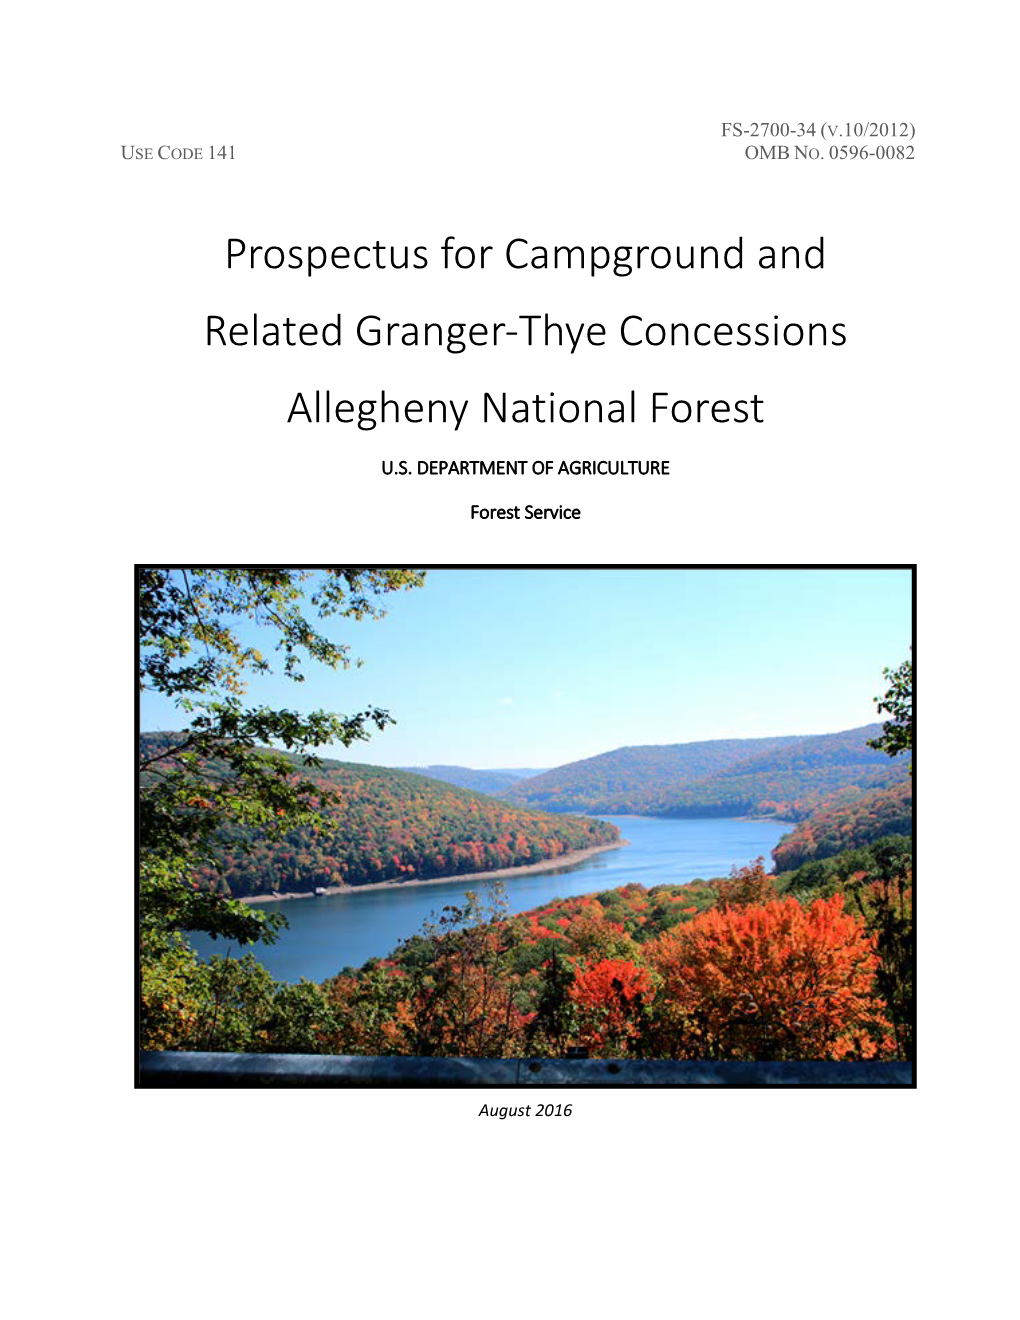 Prospectus for Campground and Related Granger-Thye Concessions Allegheny National Forest